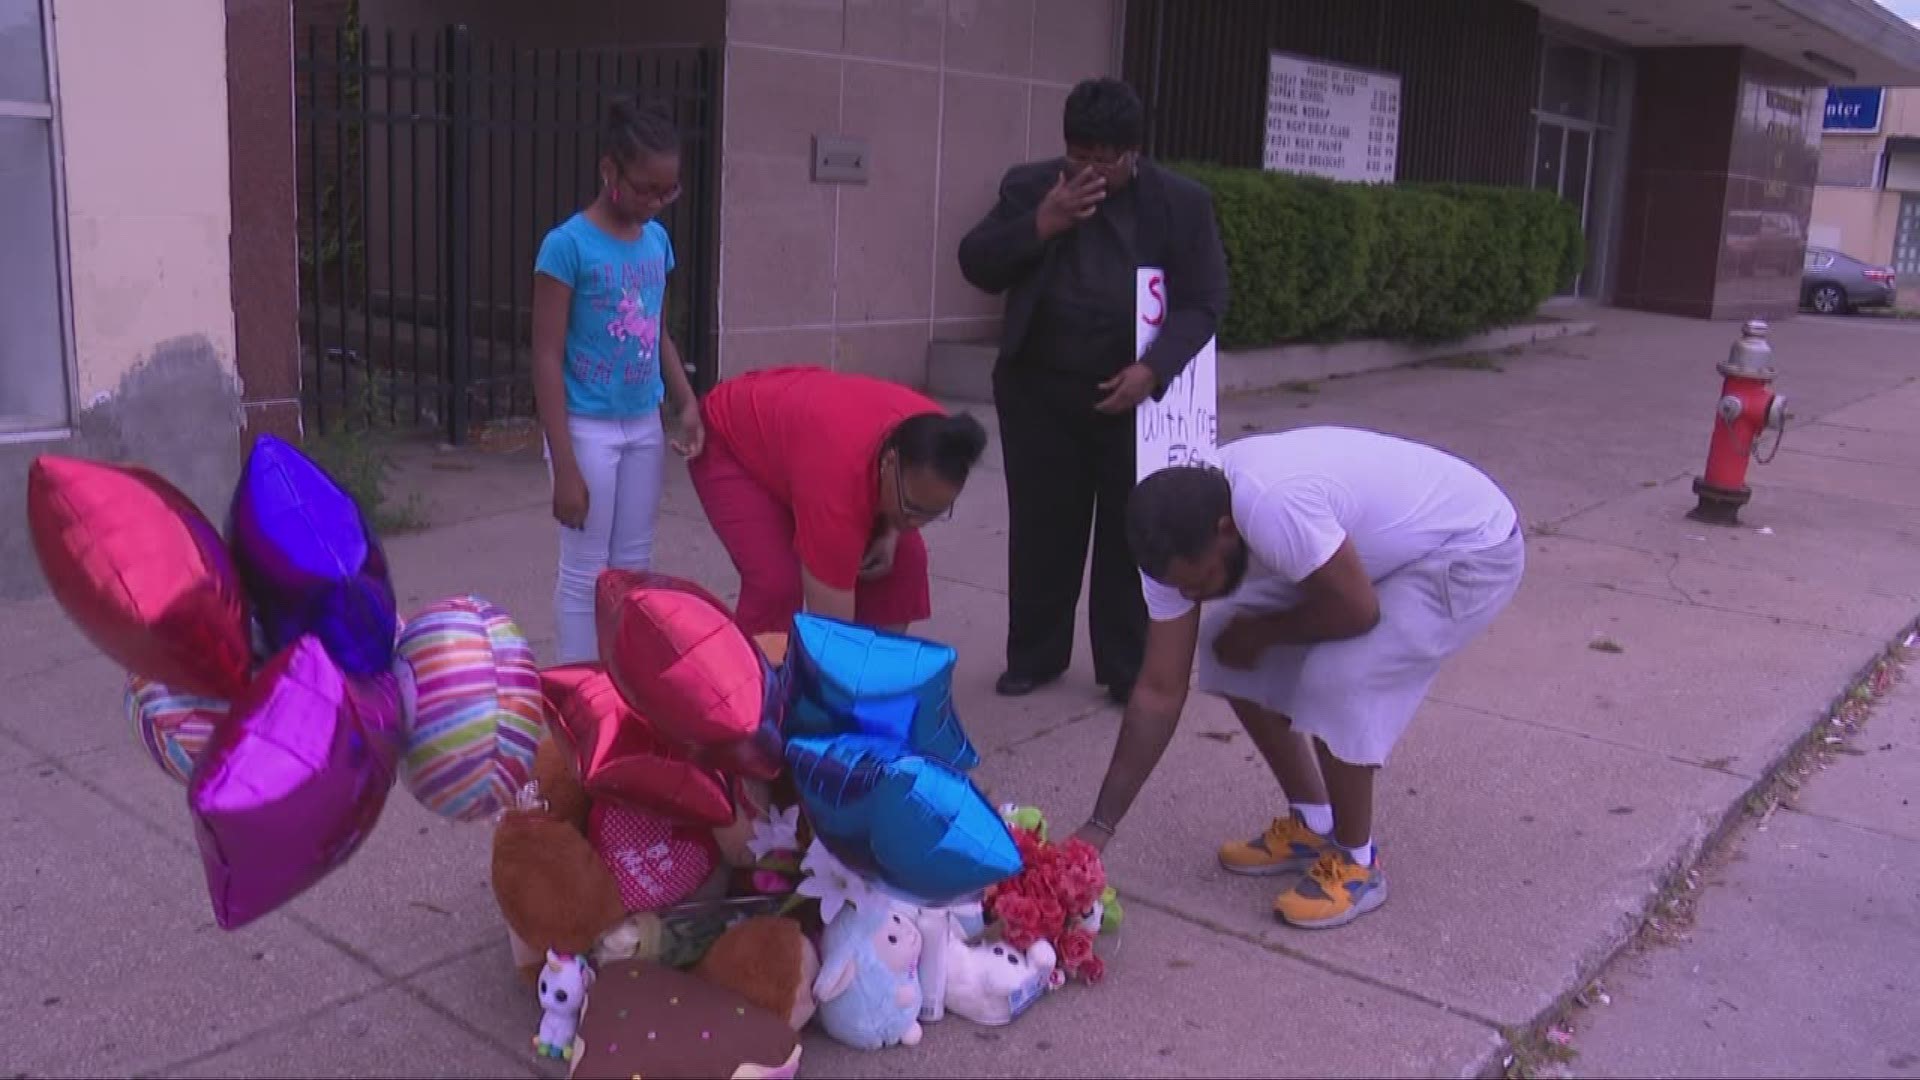 Community offers support to mother of 9-year-old girl fatally shot on Cleveland's east side